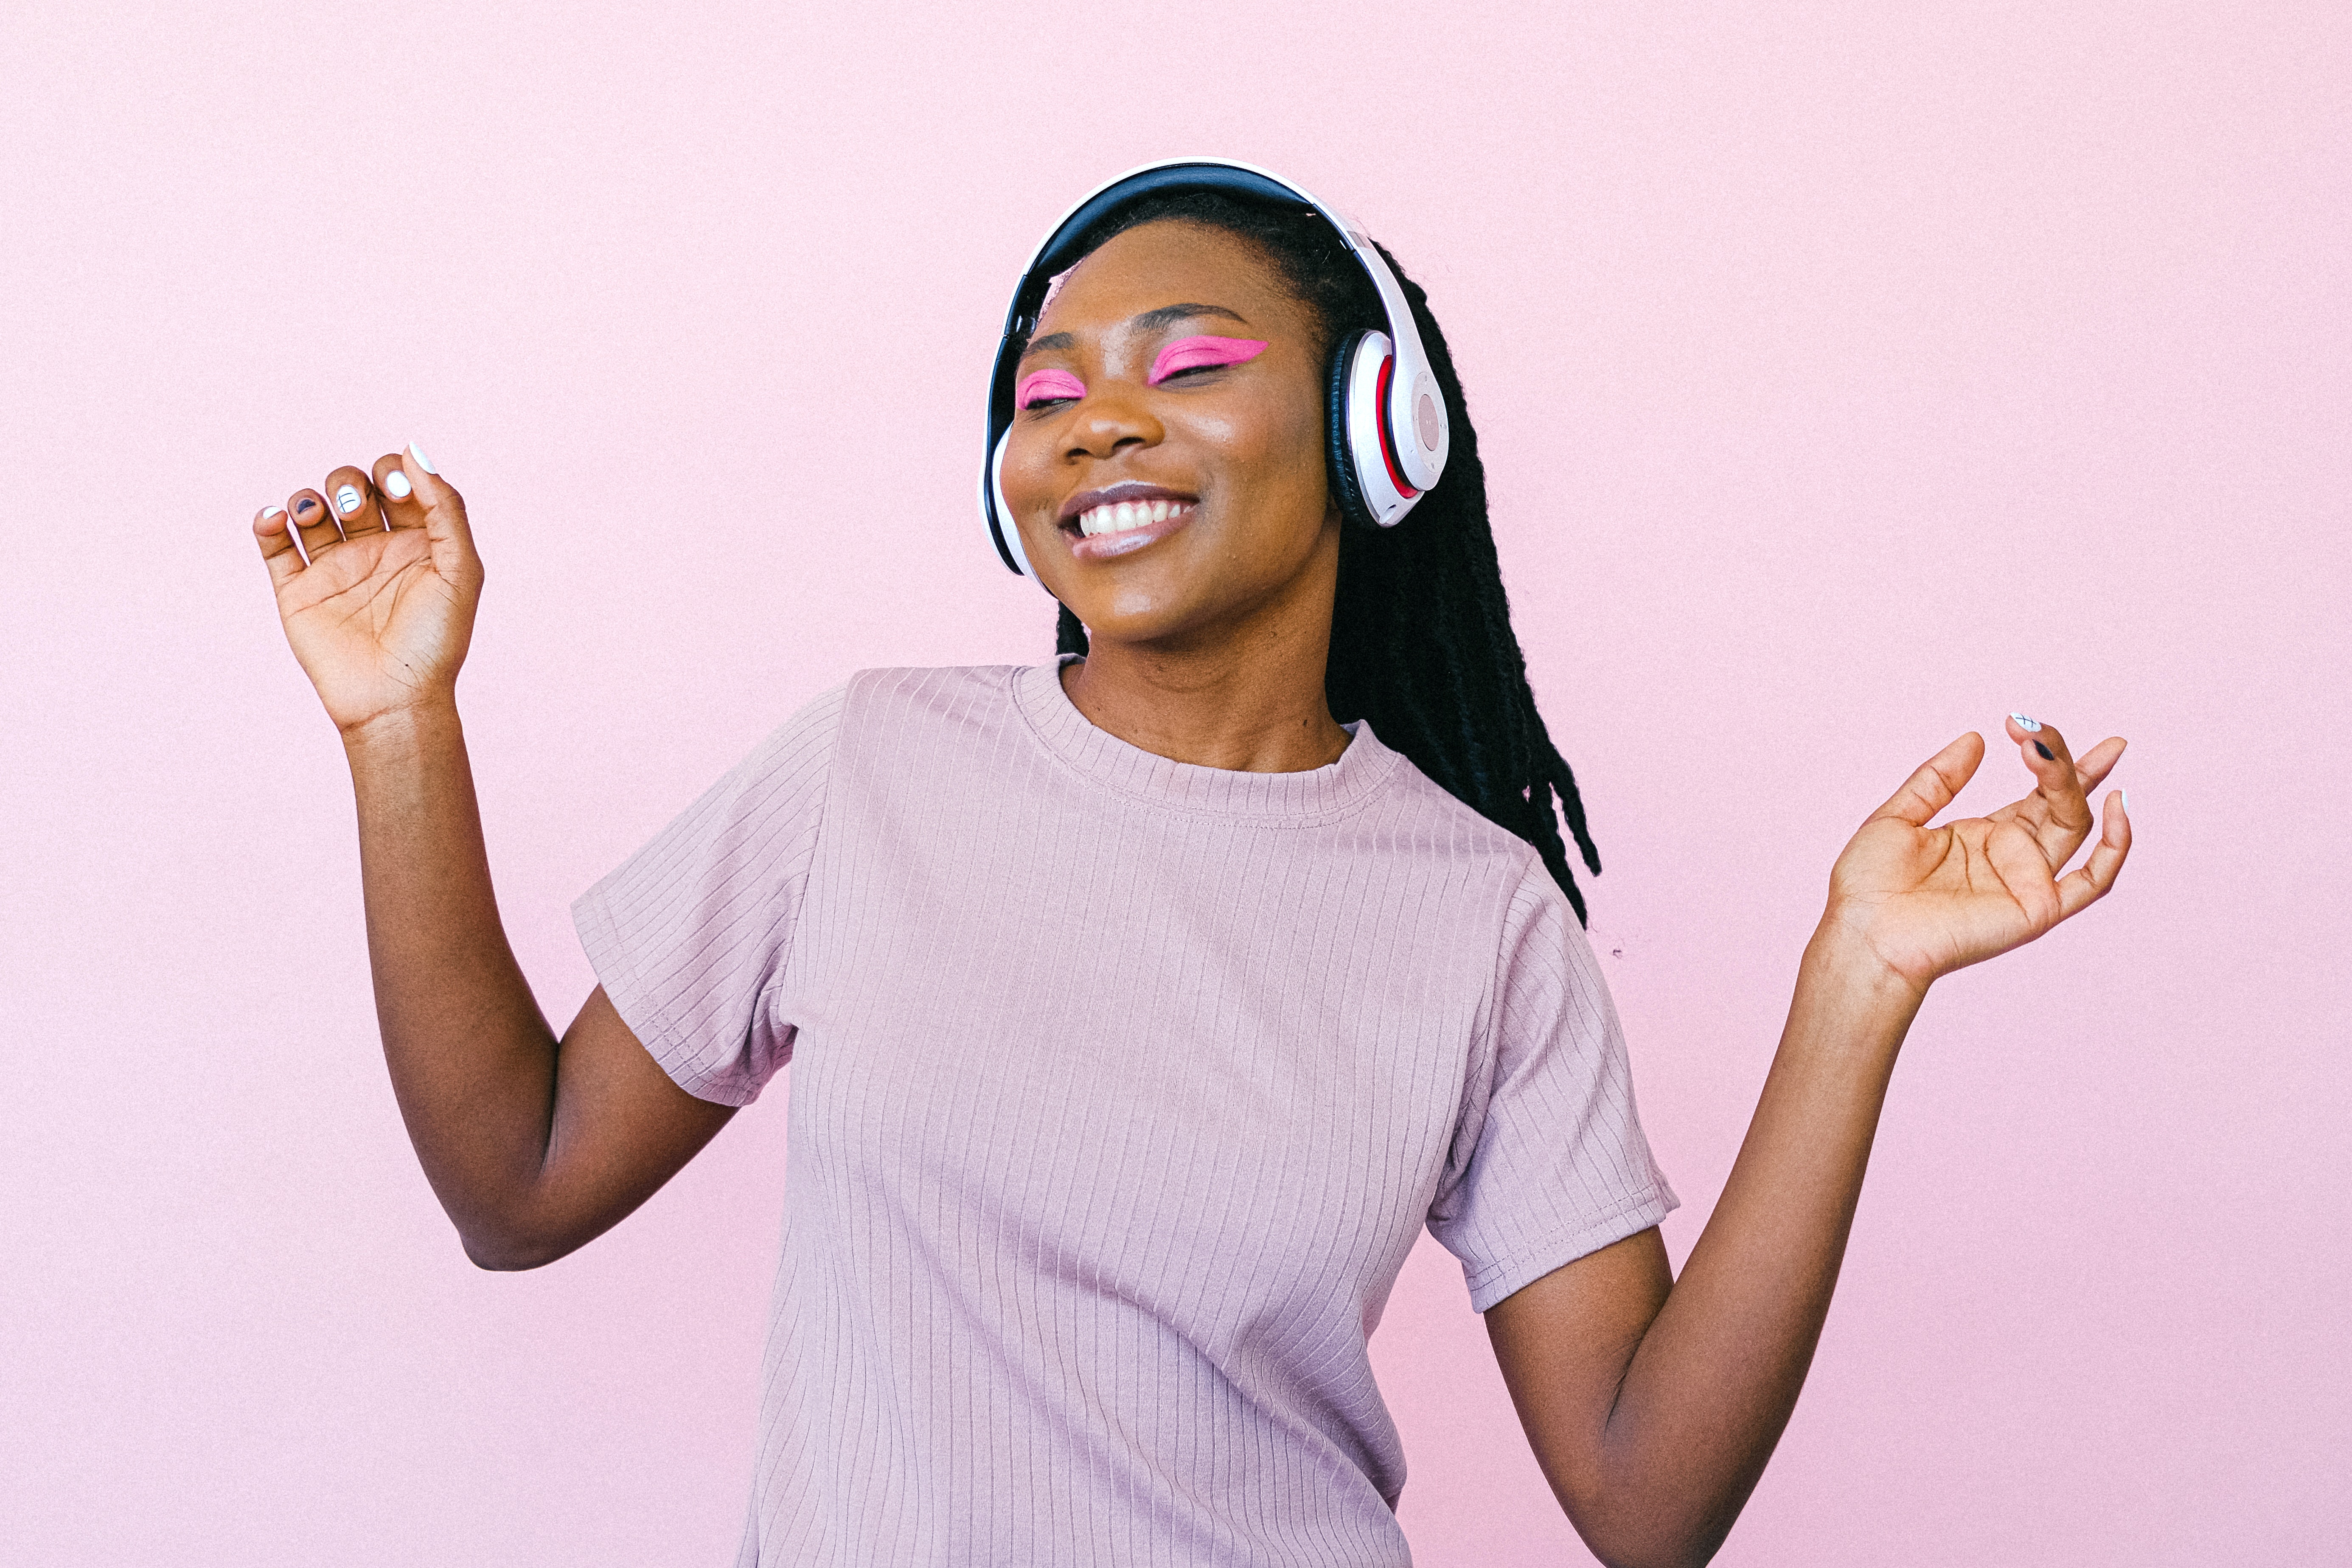 Image of black woman with headphones on and her eyes closed, dancing by herself. There is a purple/pink background.